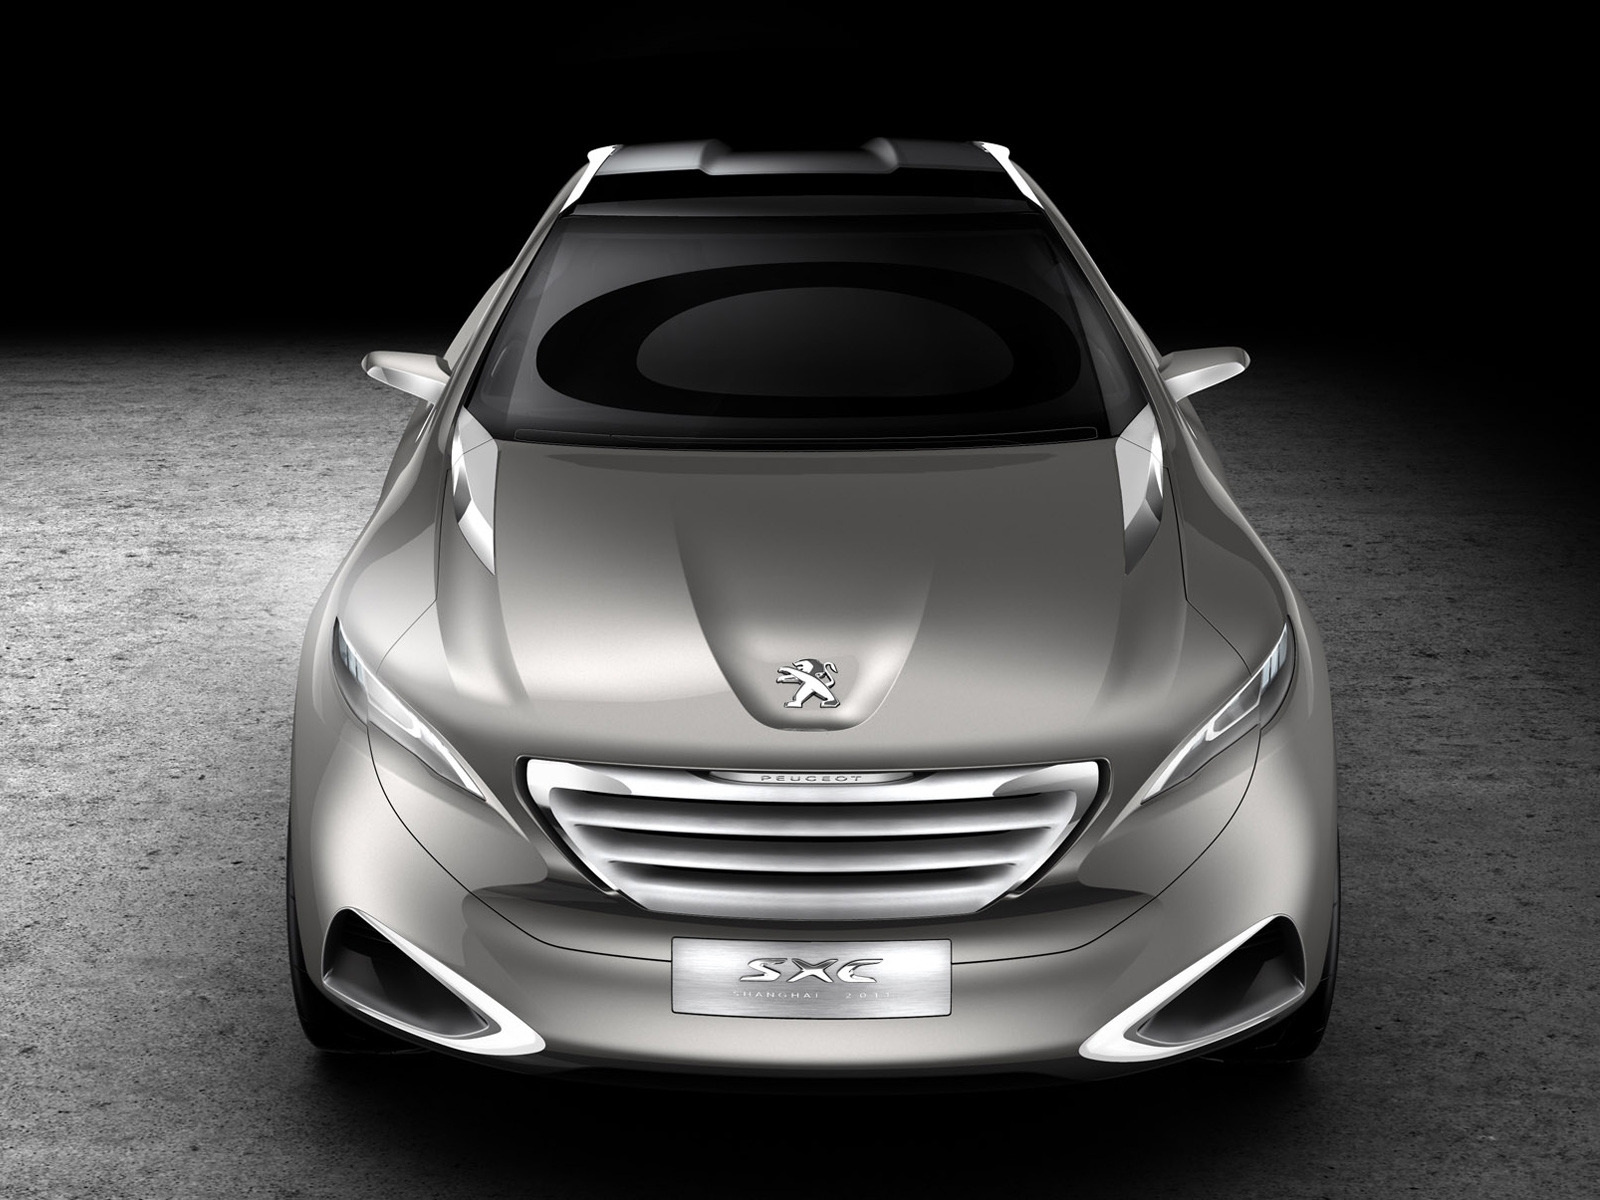 Peugeot SXC Concept Front for 1600 x 1200 resolution